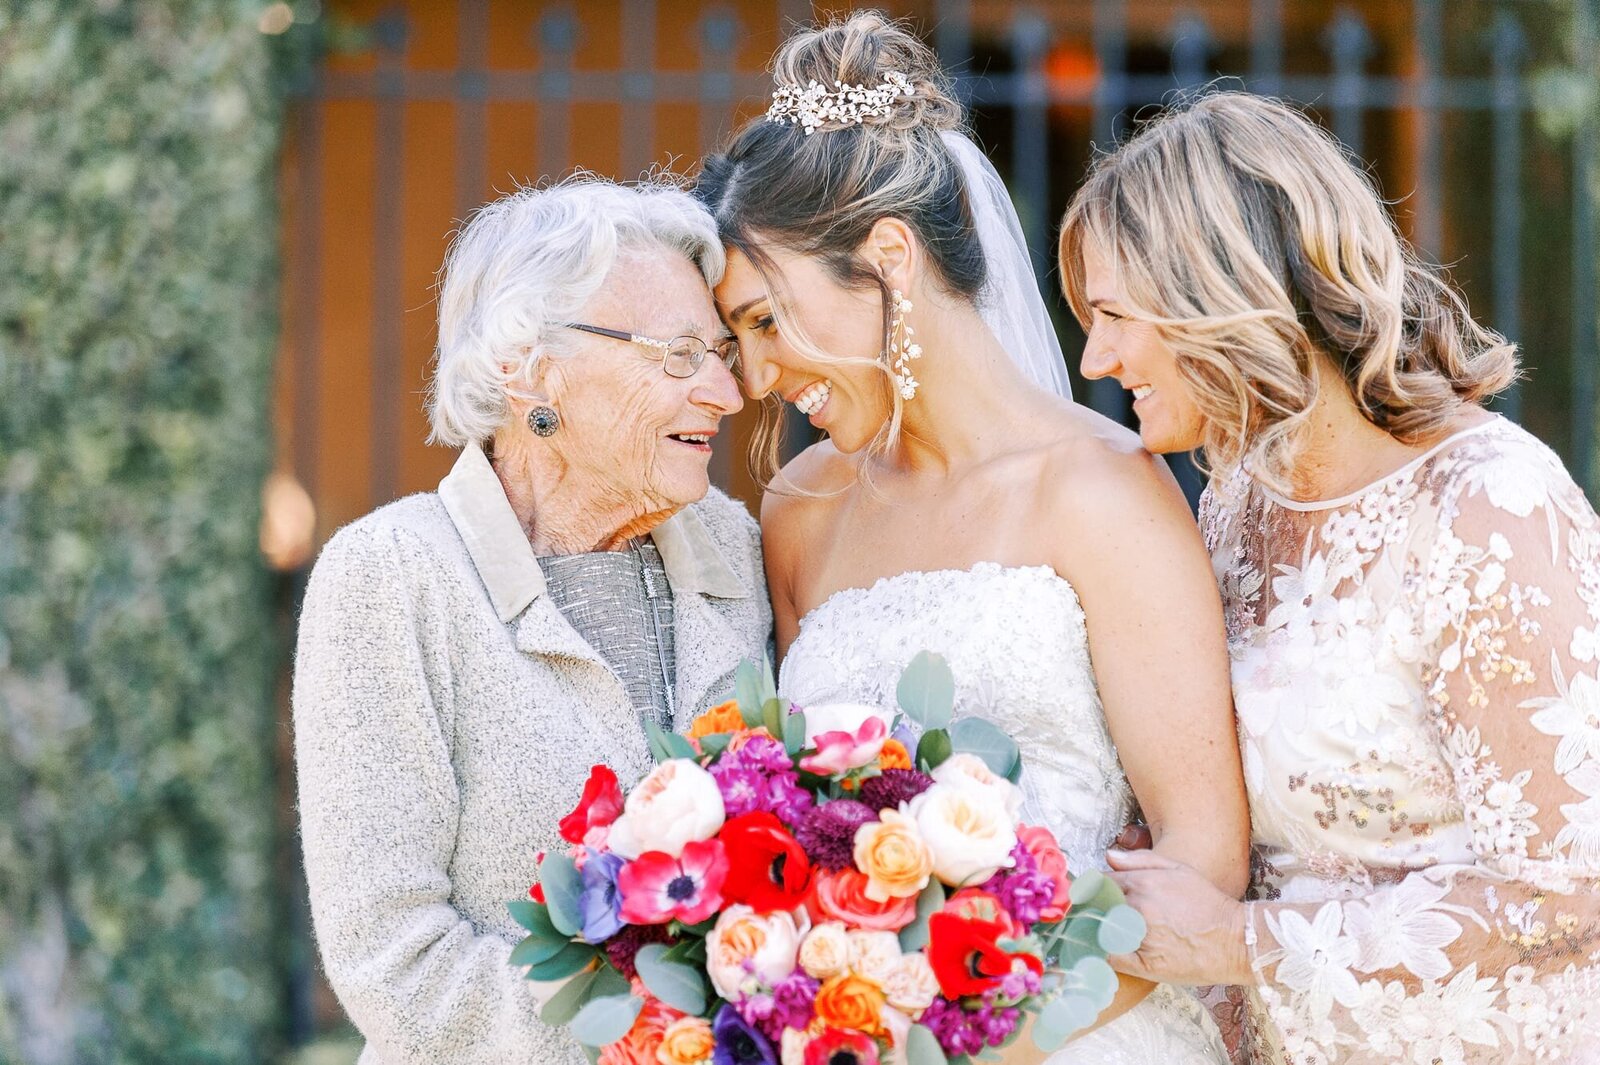 Bride shares a sweet moment with her mom and grandma.